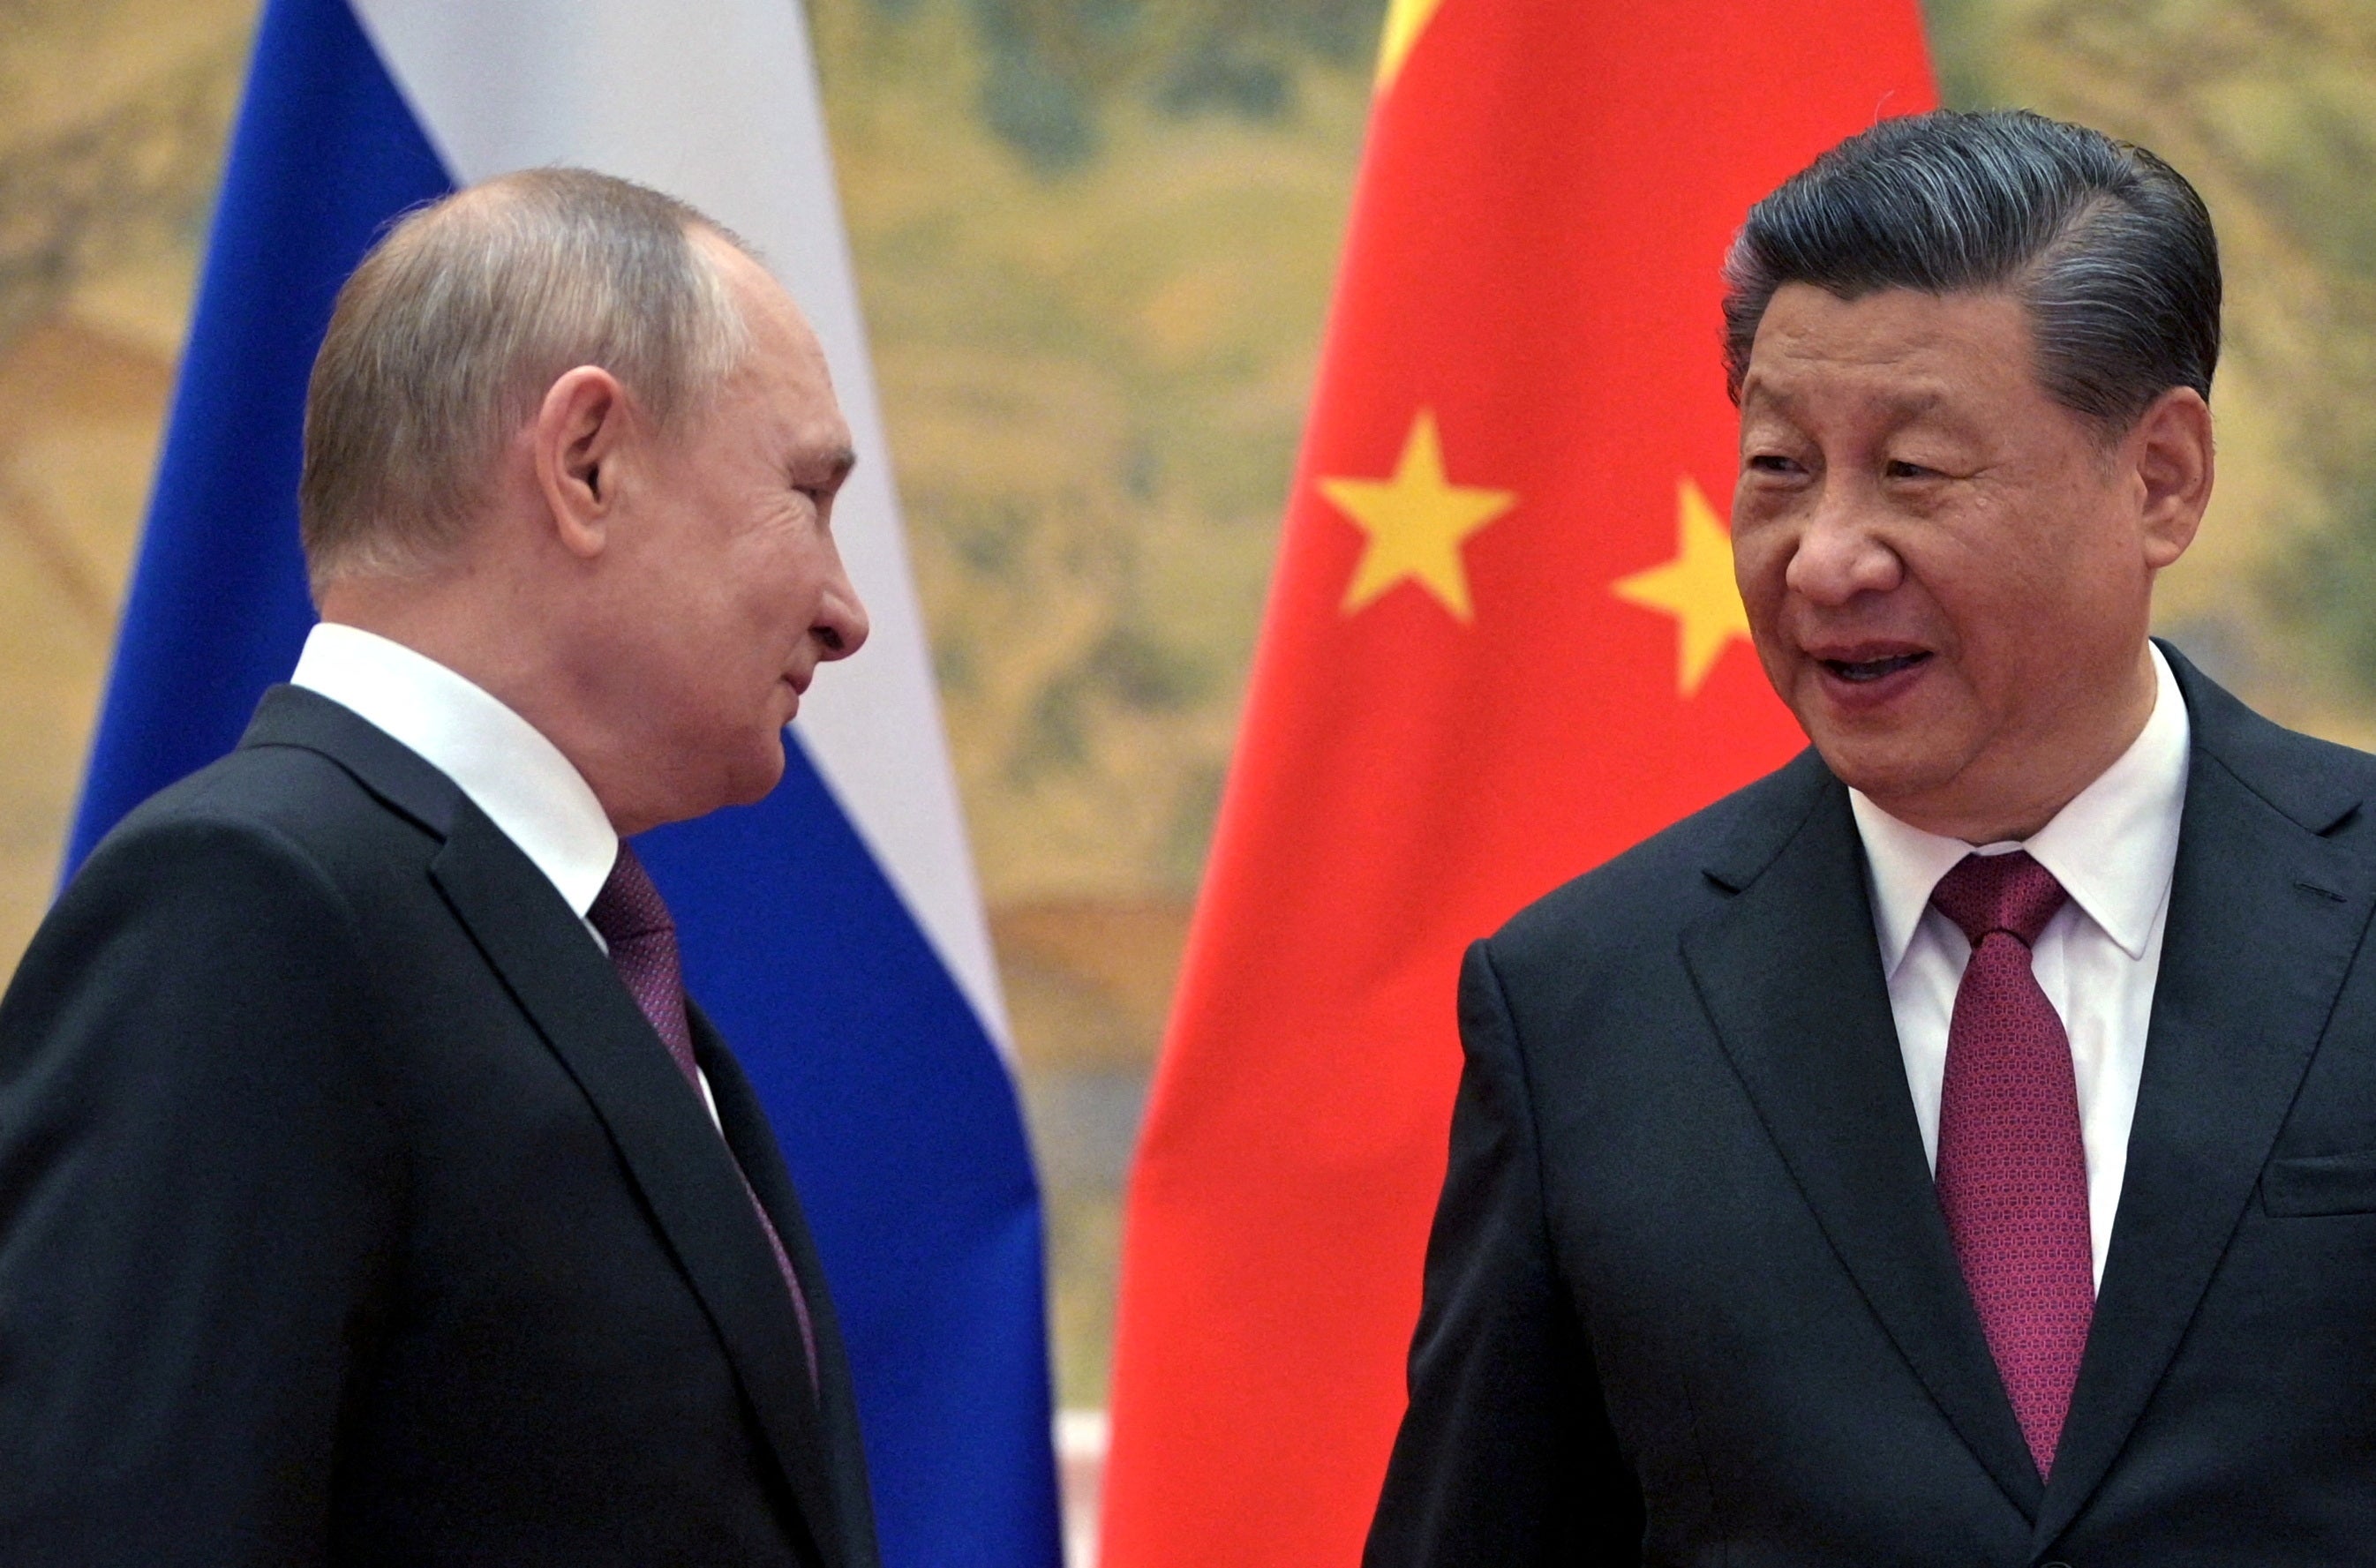 Russian president Vladimir Putin and his Chinese counterpart Xi Jinping meet in Beijing on 4 February, 2022